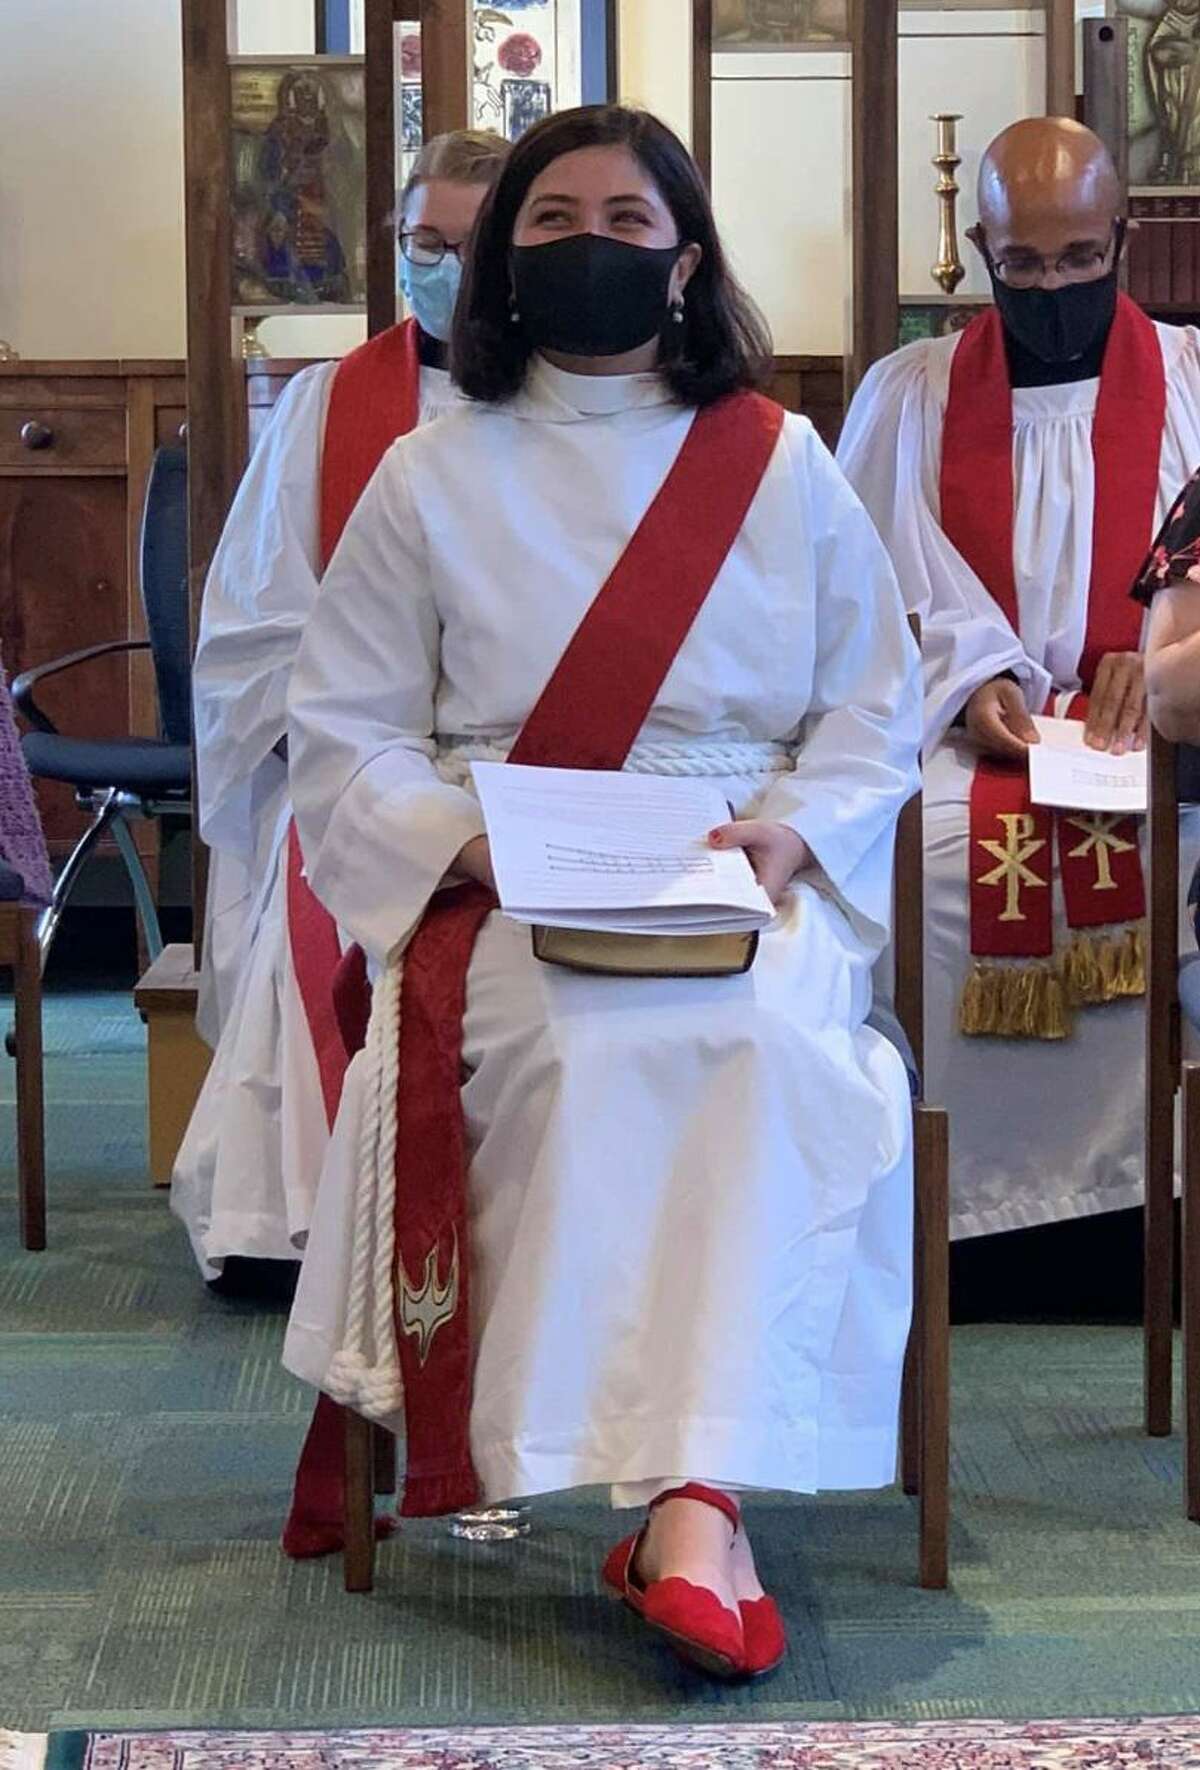 The Rev. Melina Dezhbod at her ordination to the Episcopal diaconate in July 2021.